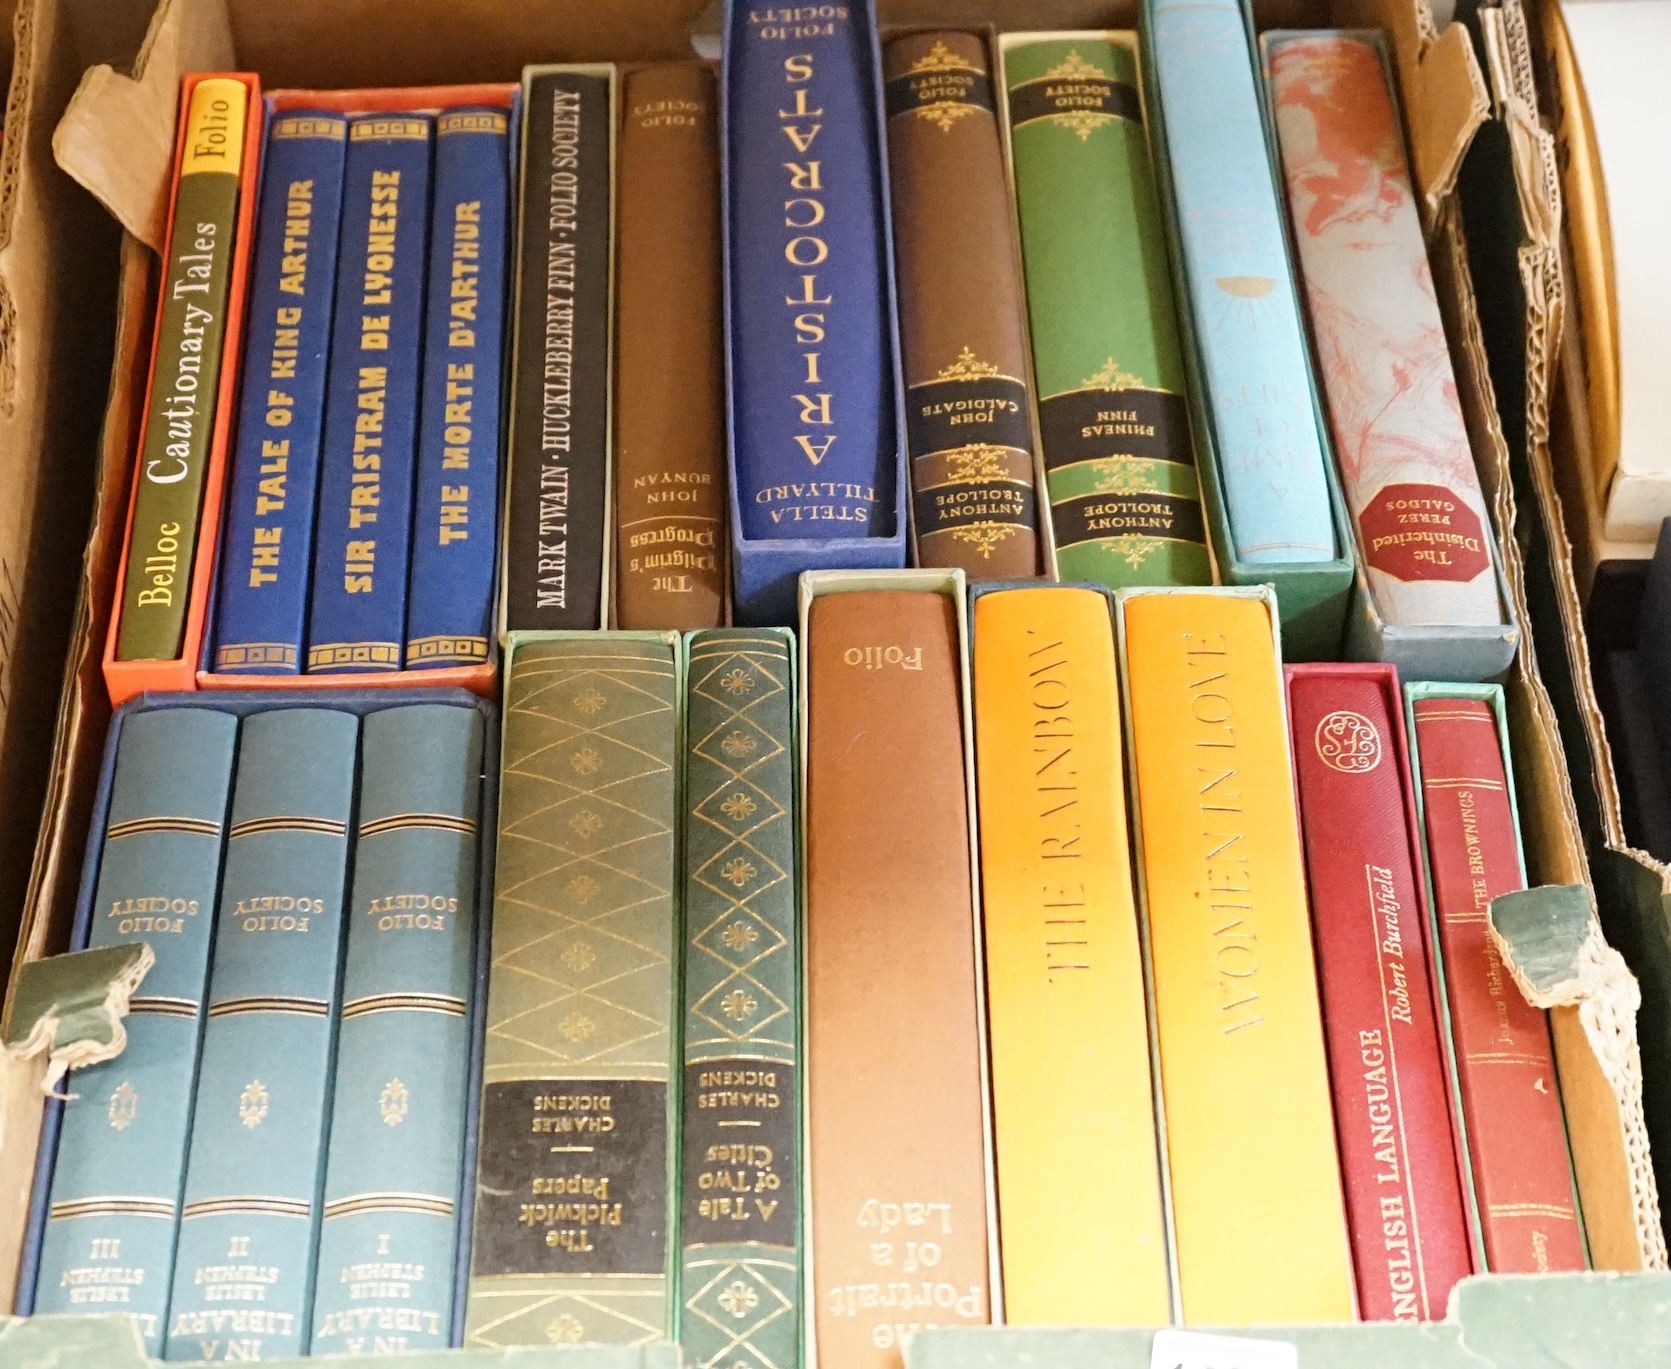 A collection of Folio Society fiction and poetry books